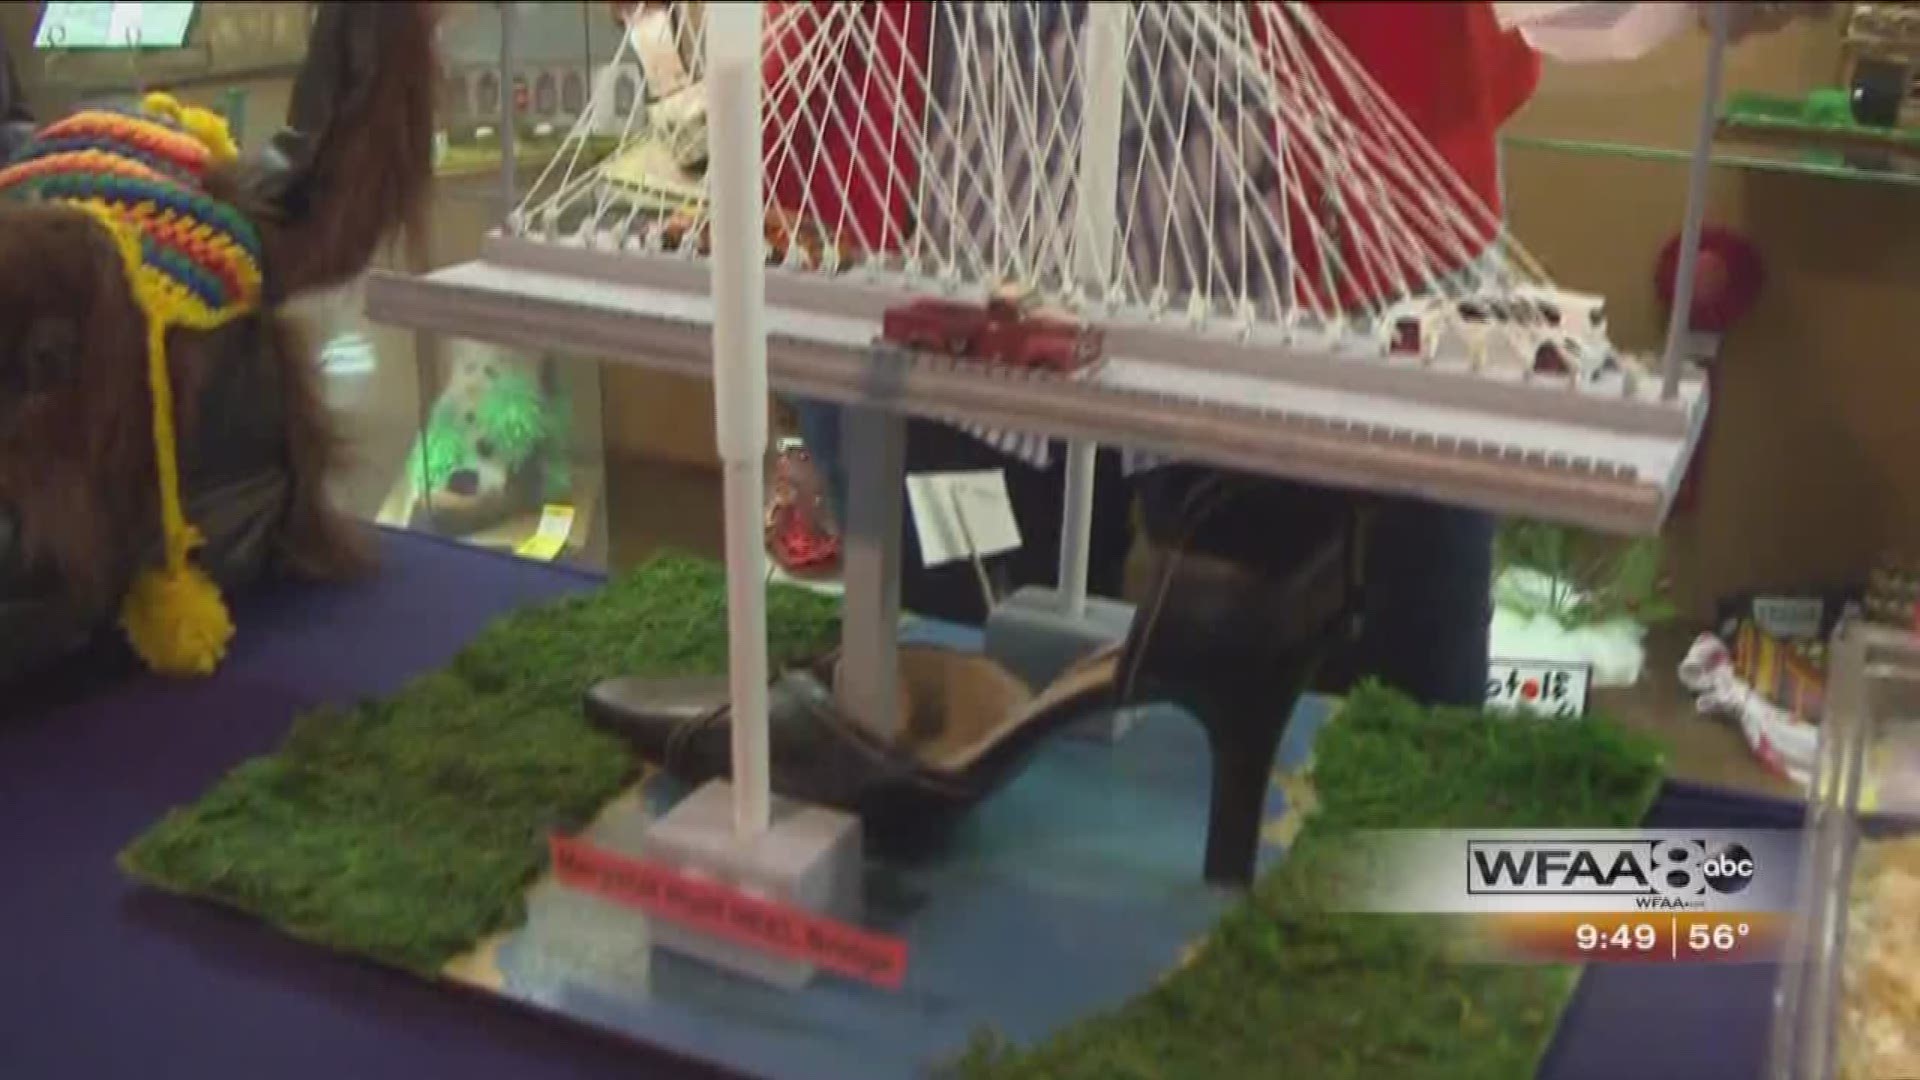 One of the State Fair of Texas' most popular competitions is the Glue a Shoe, and this year didn't disappoint.